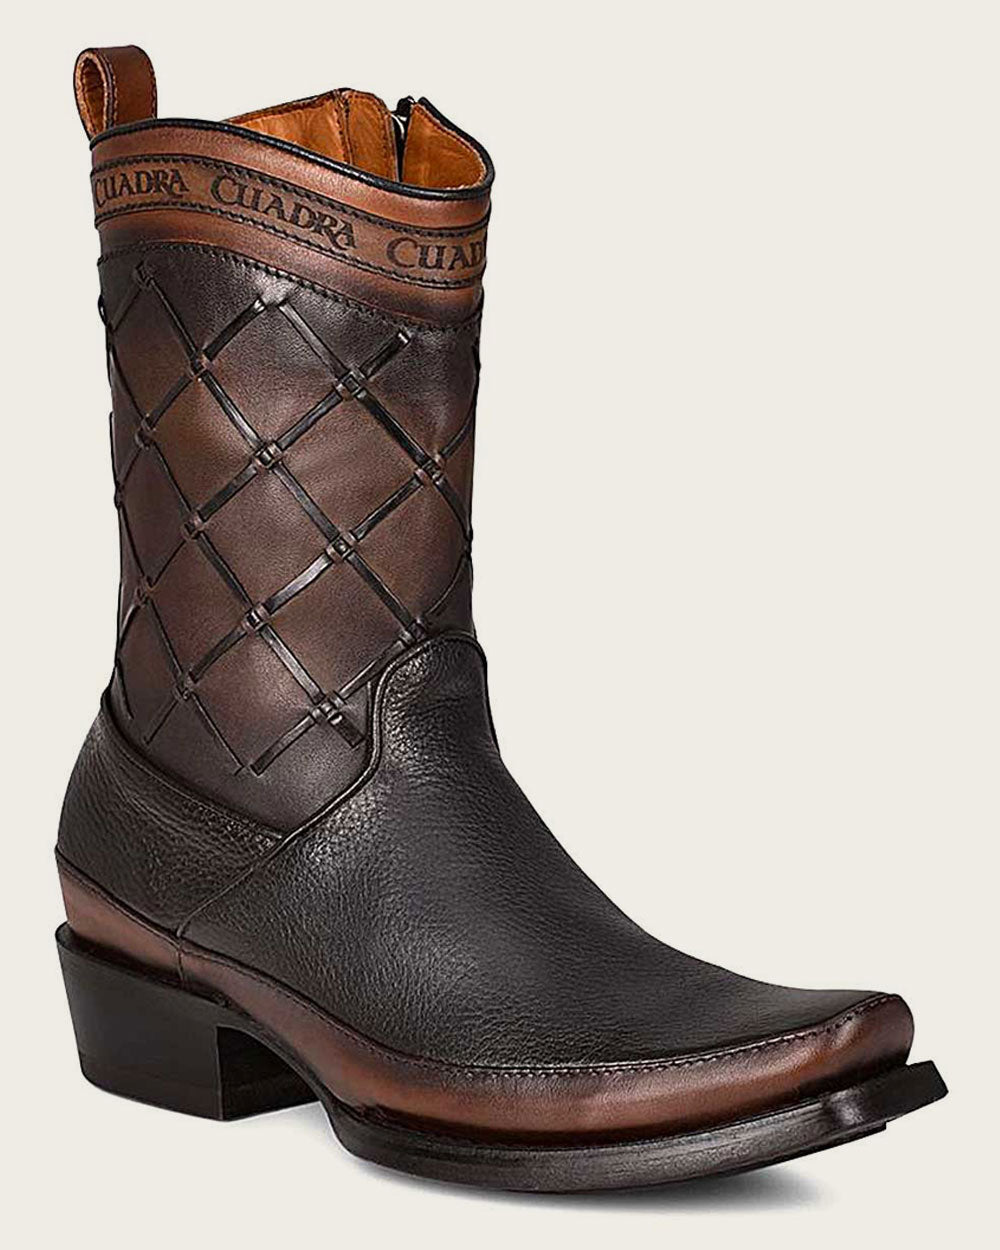 Geometric Detailed Boots: Handcrafted boots with laser-etched Cuadra logo, elevating your footwear game.